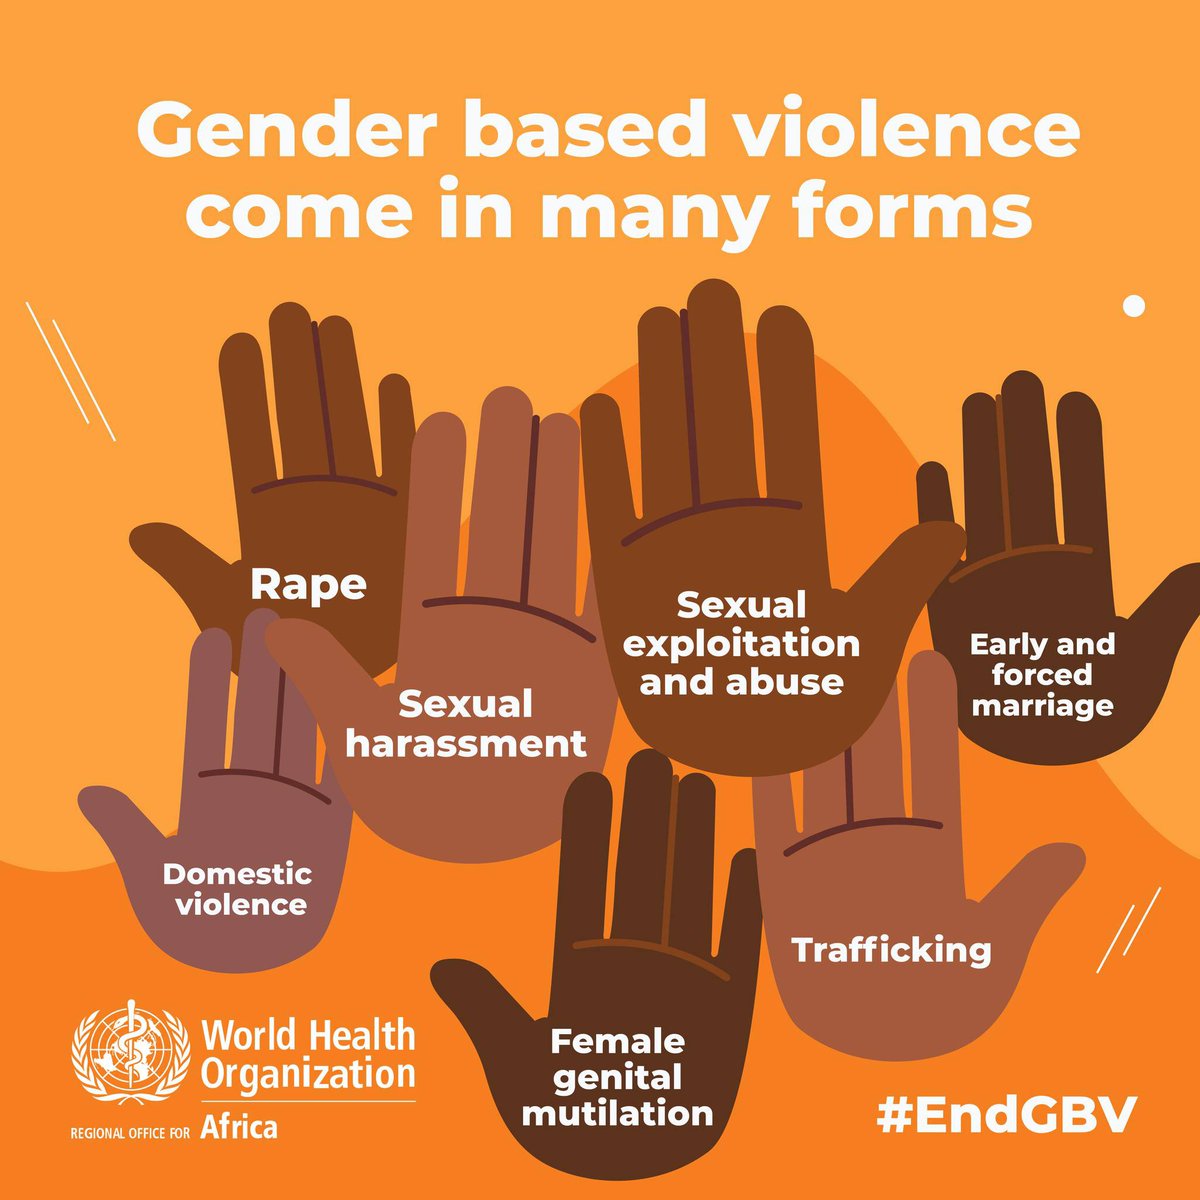 Zero Tolerance for Sexual Misconduct ! 📢Let’s talk about it: 1 in 3 women and girls experience violence in their lifetime. We can all do our part to support victims, starting by speaking out and sending a clear message: ‘You are NOT alone'. #EndGBV